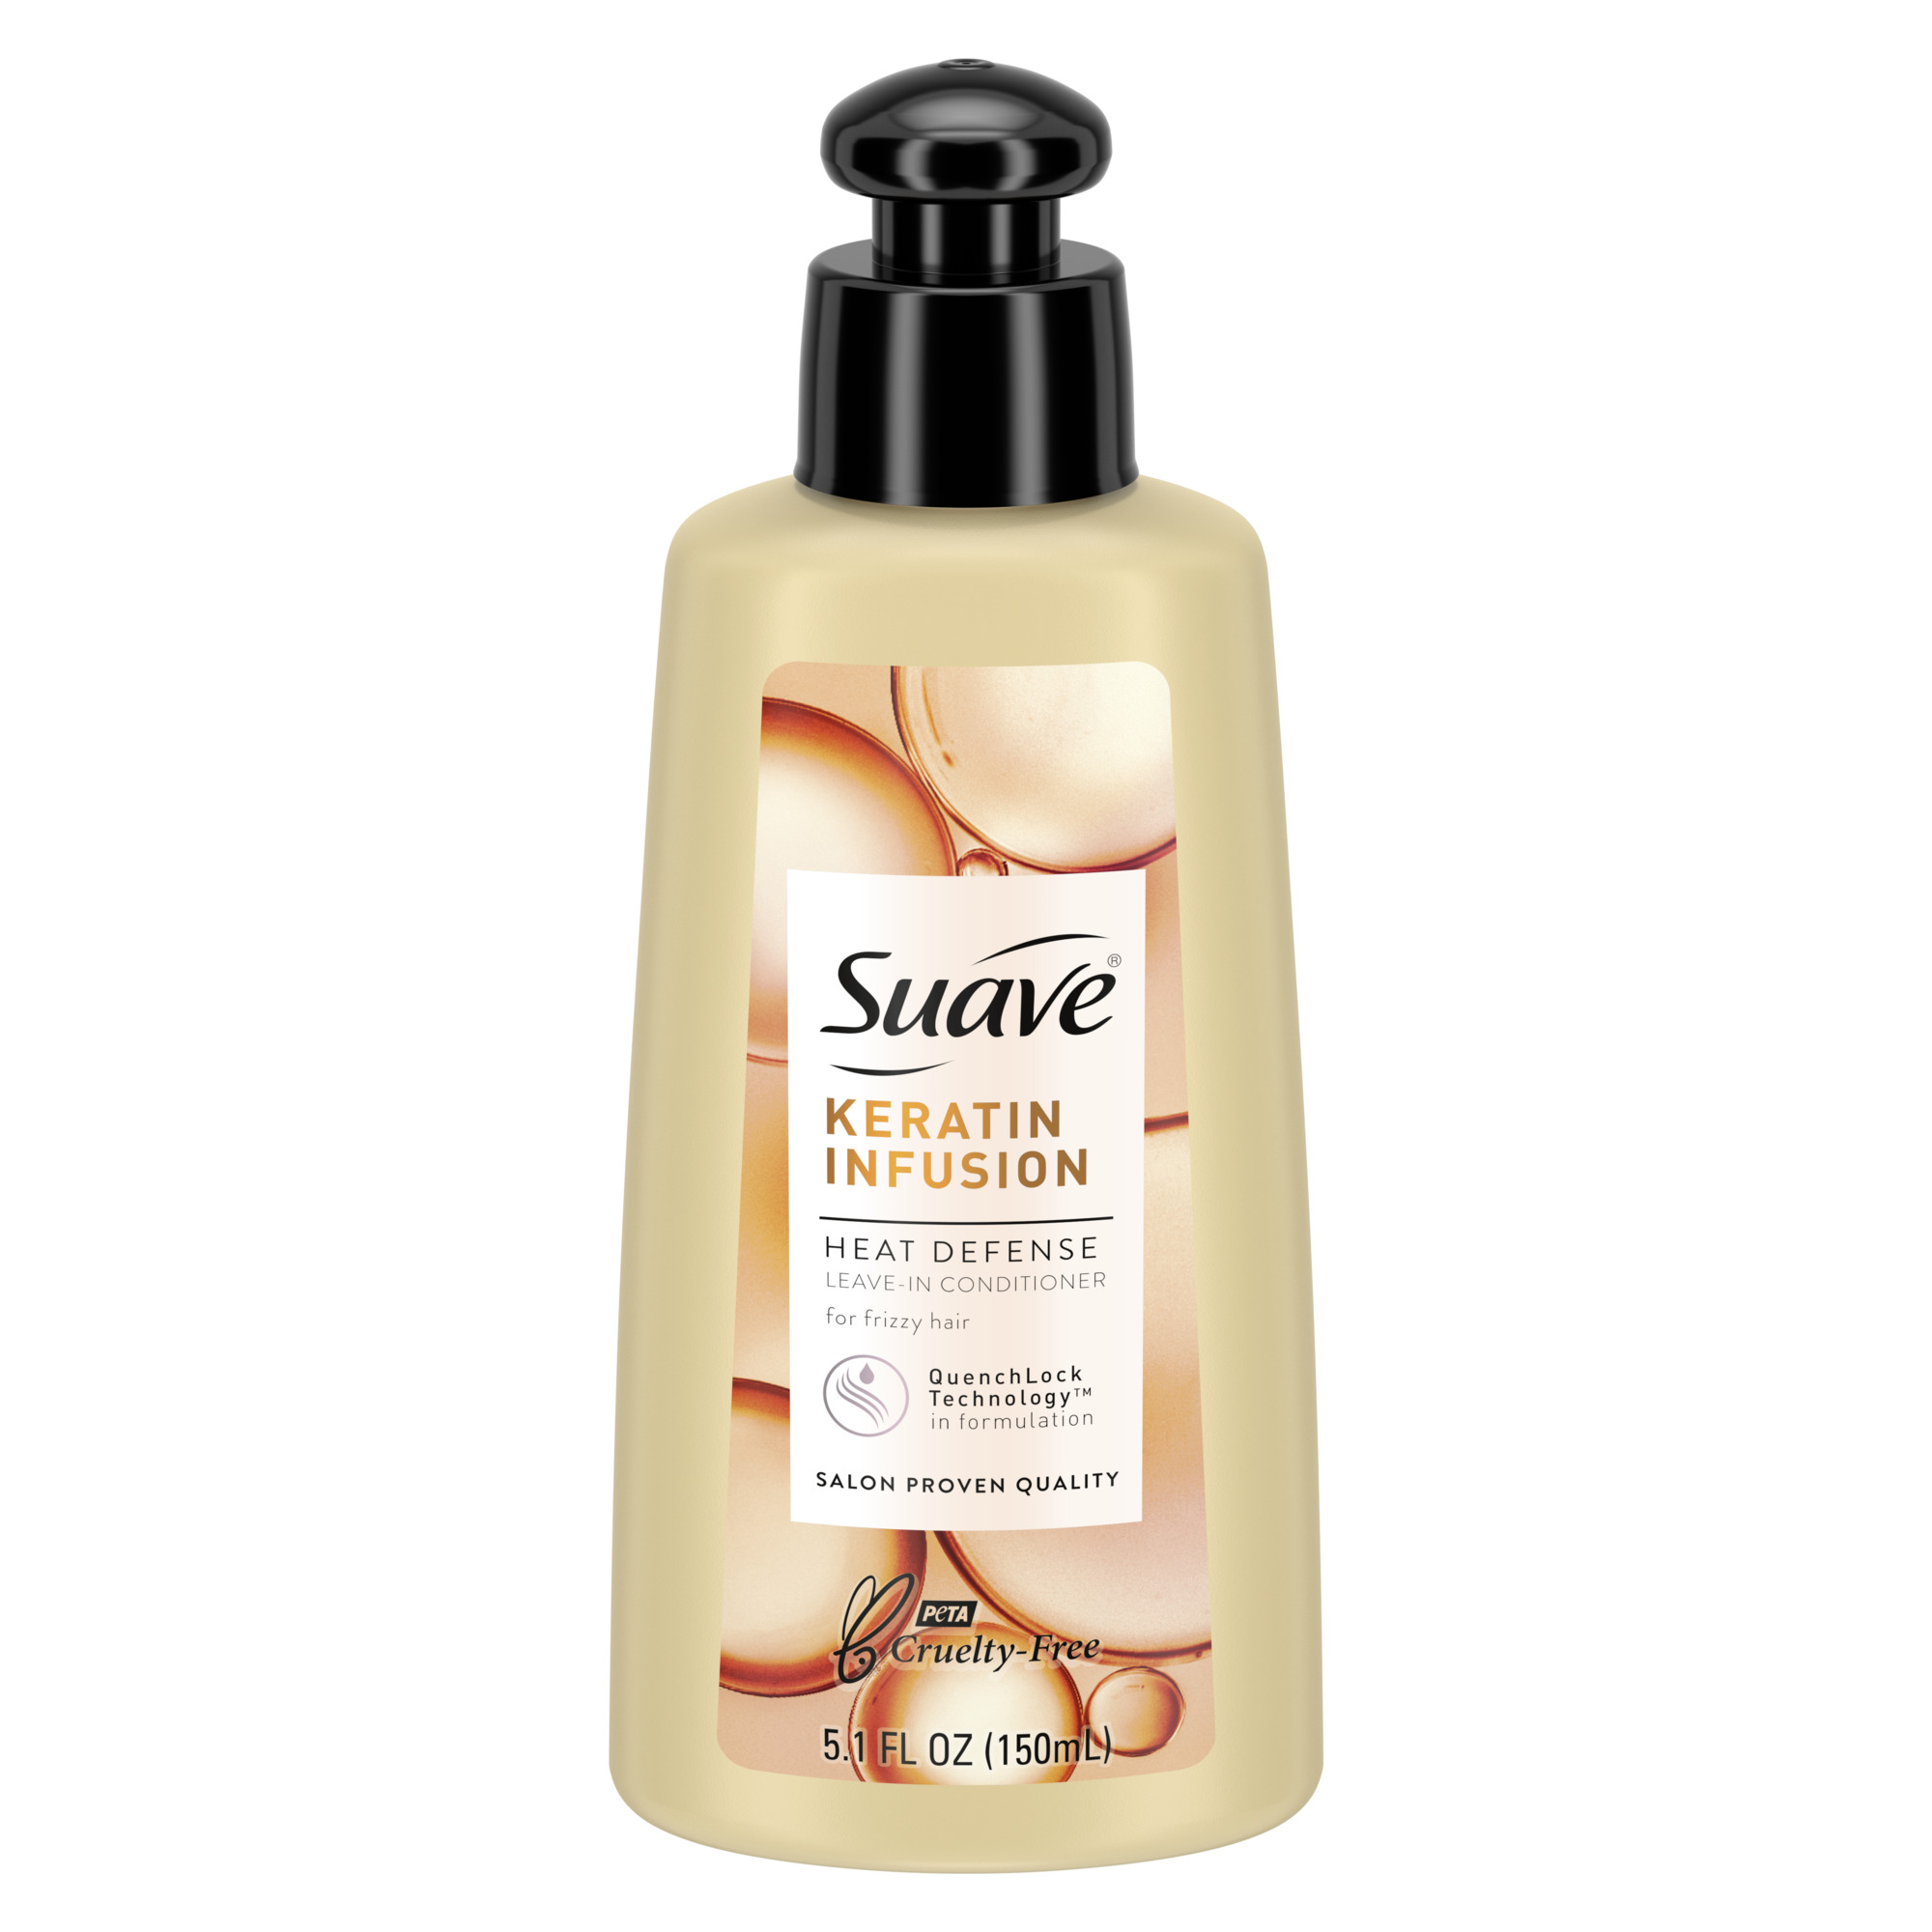 Suave Keratin Infusion Heat Defense Leave-in Conditioner 5.1 fl oz - image 2 of 5